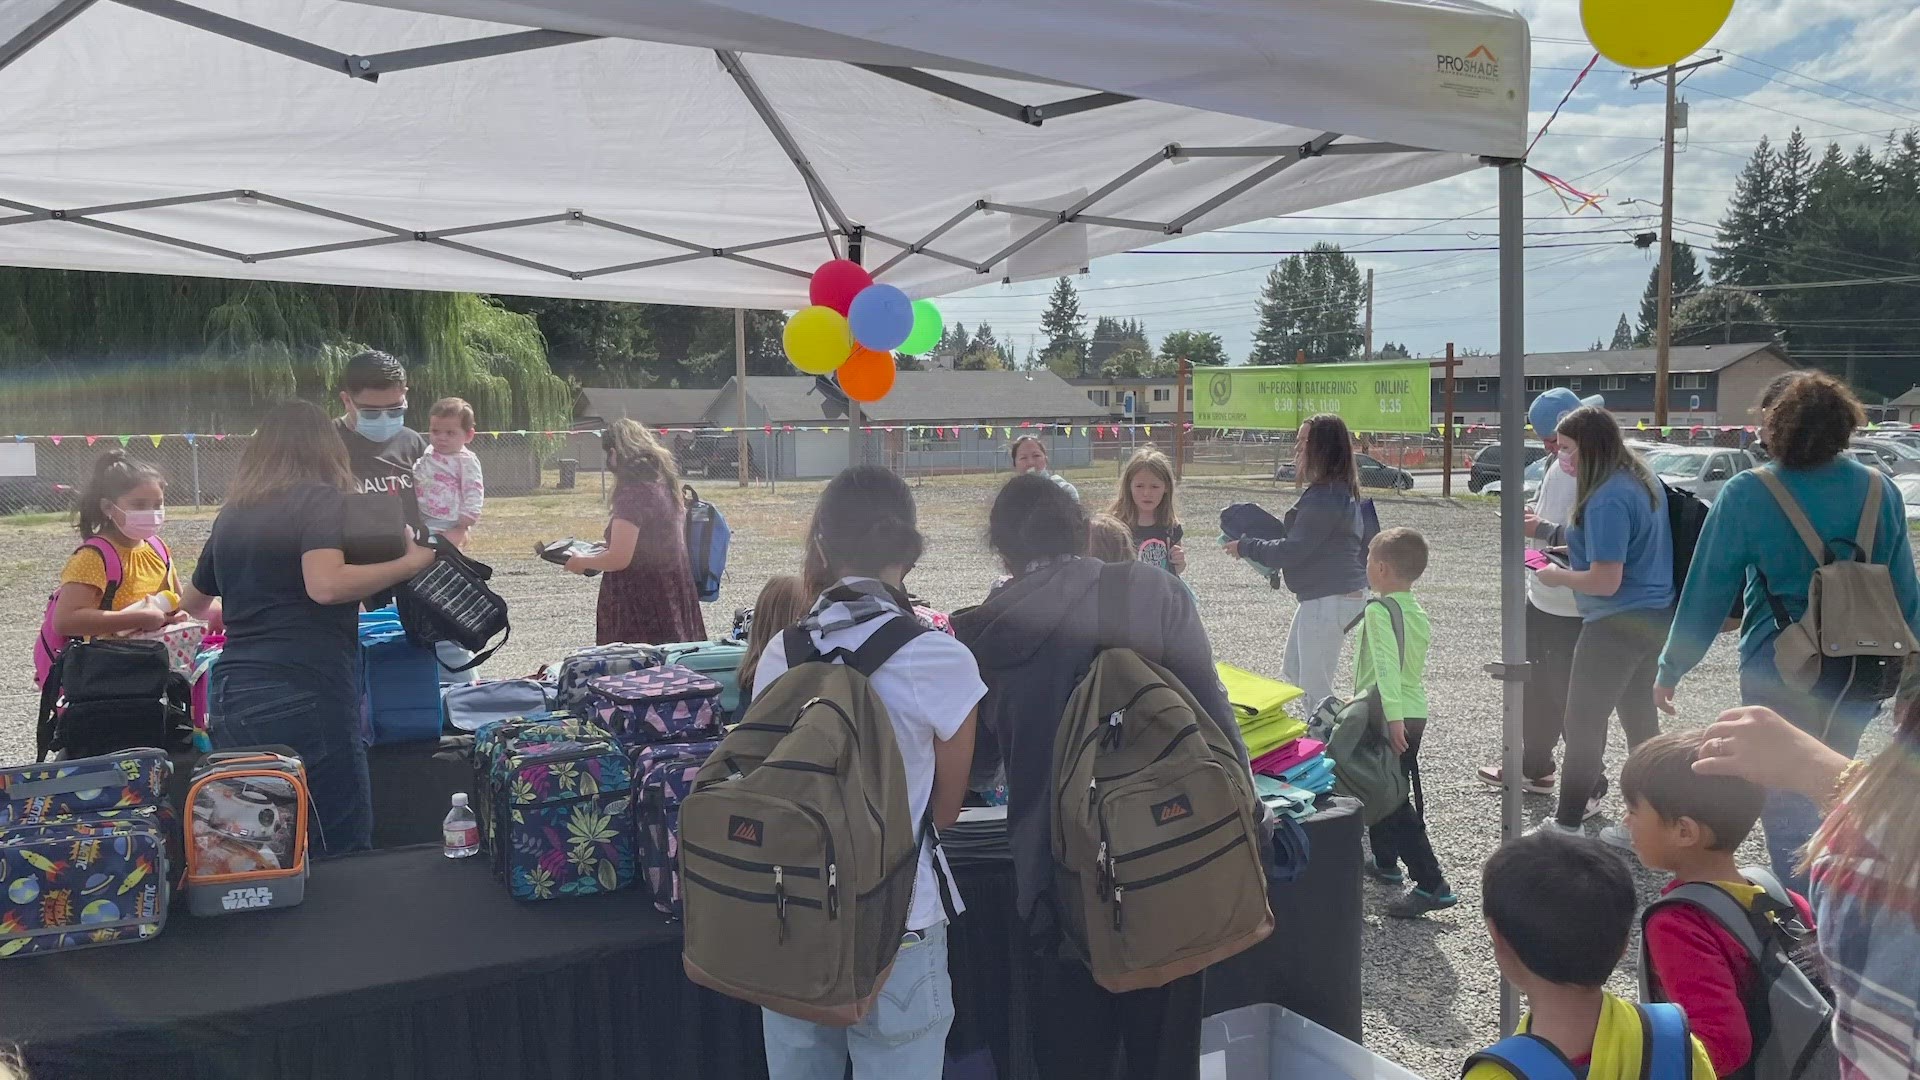 The Grove Church is searching for assistance ahead of a back-to-school event that will offer free haircuts, food and school supplies for families in need.